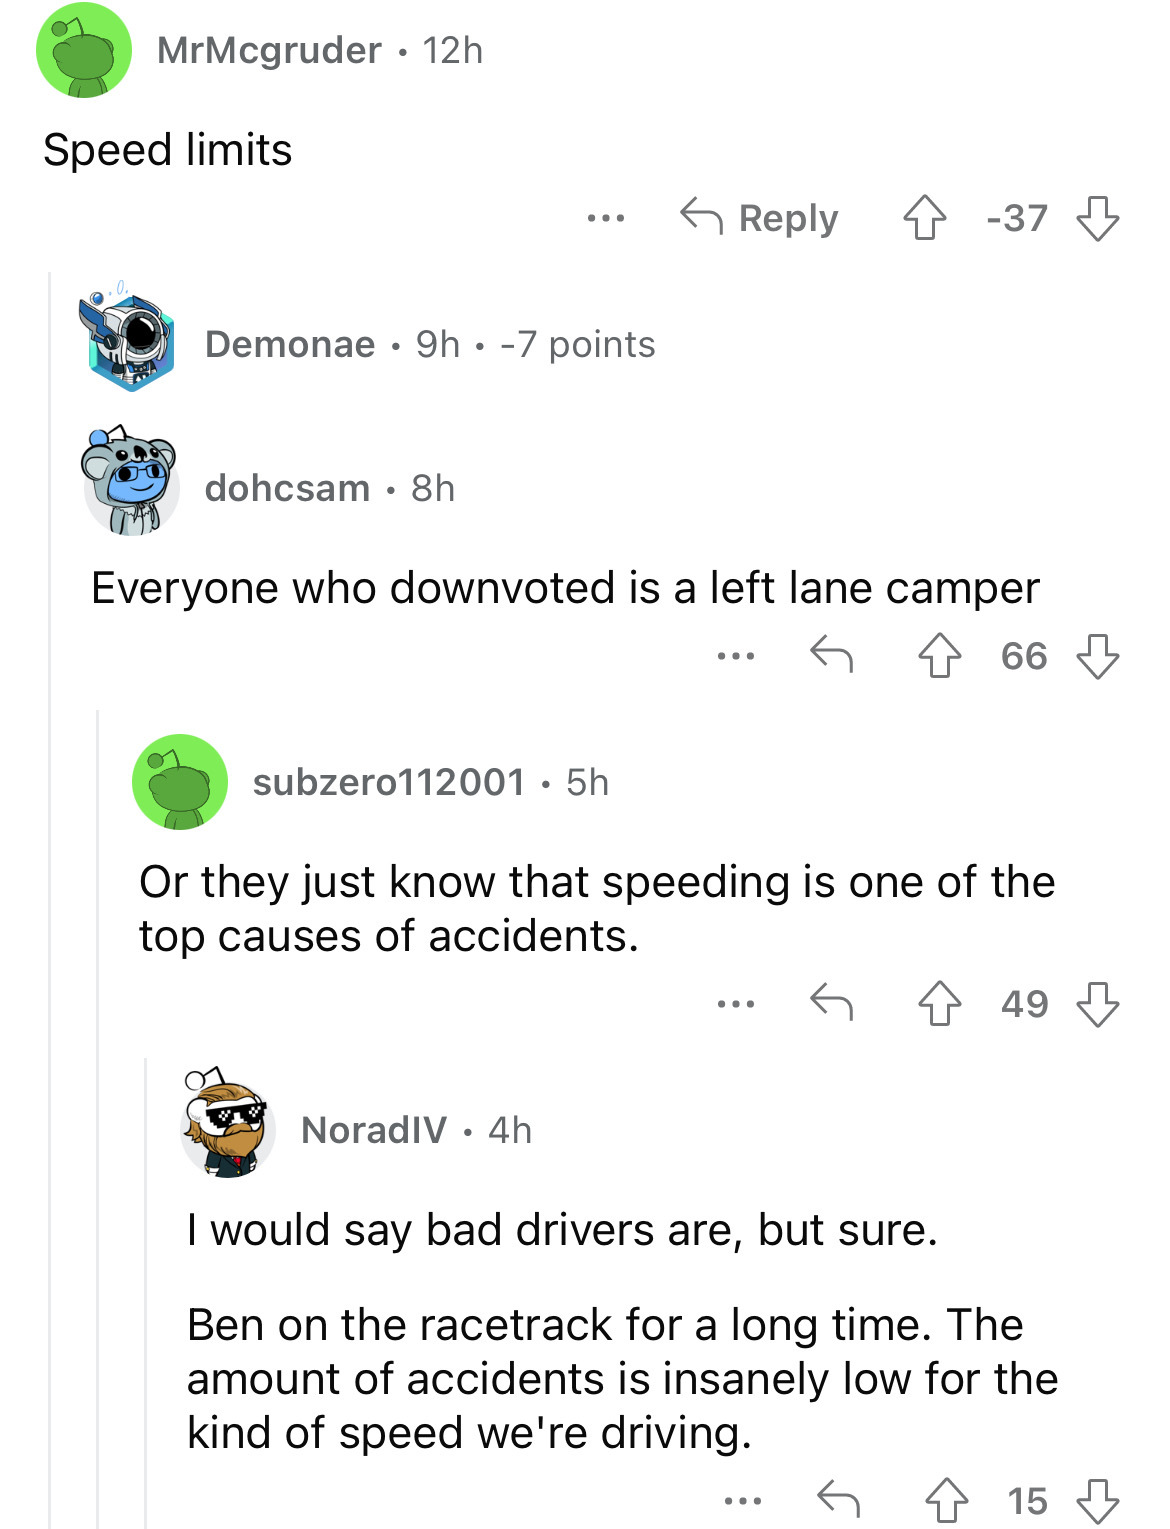 angle - MrMcgruder 12h Speed limits Demonae dohcsam 8h 9h 7 points ... Everyone who downvoted is a left lane camper 66 subzero112001 5h 4 37 NoradIV. 4h ... Or they just know that speeding is one of the top causes of accidents. 49 ... I would say bad driv